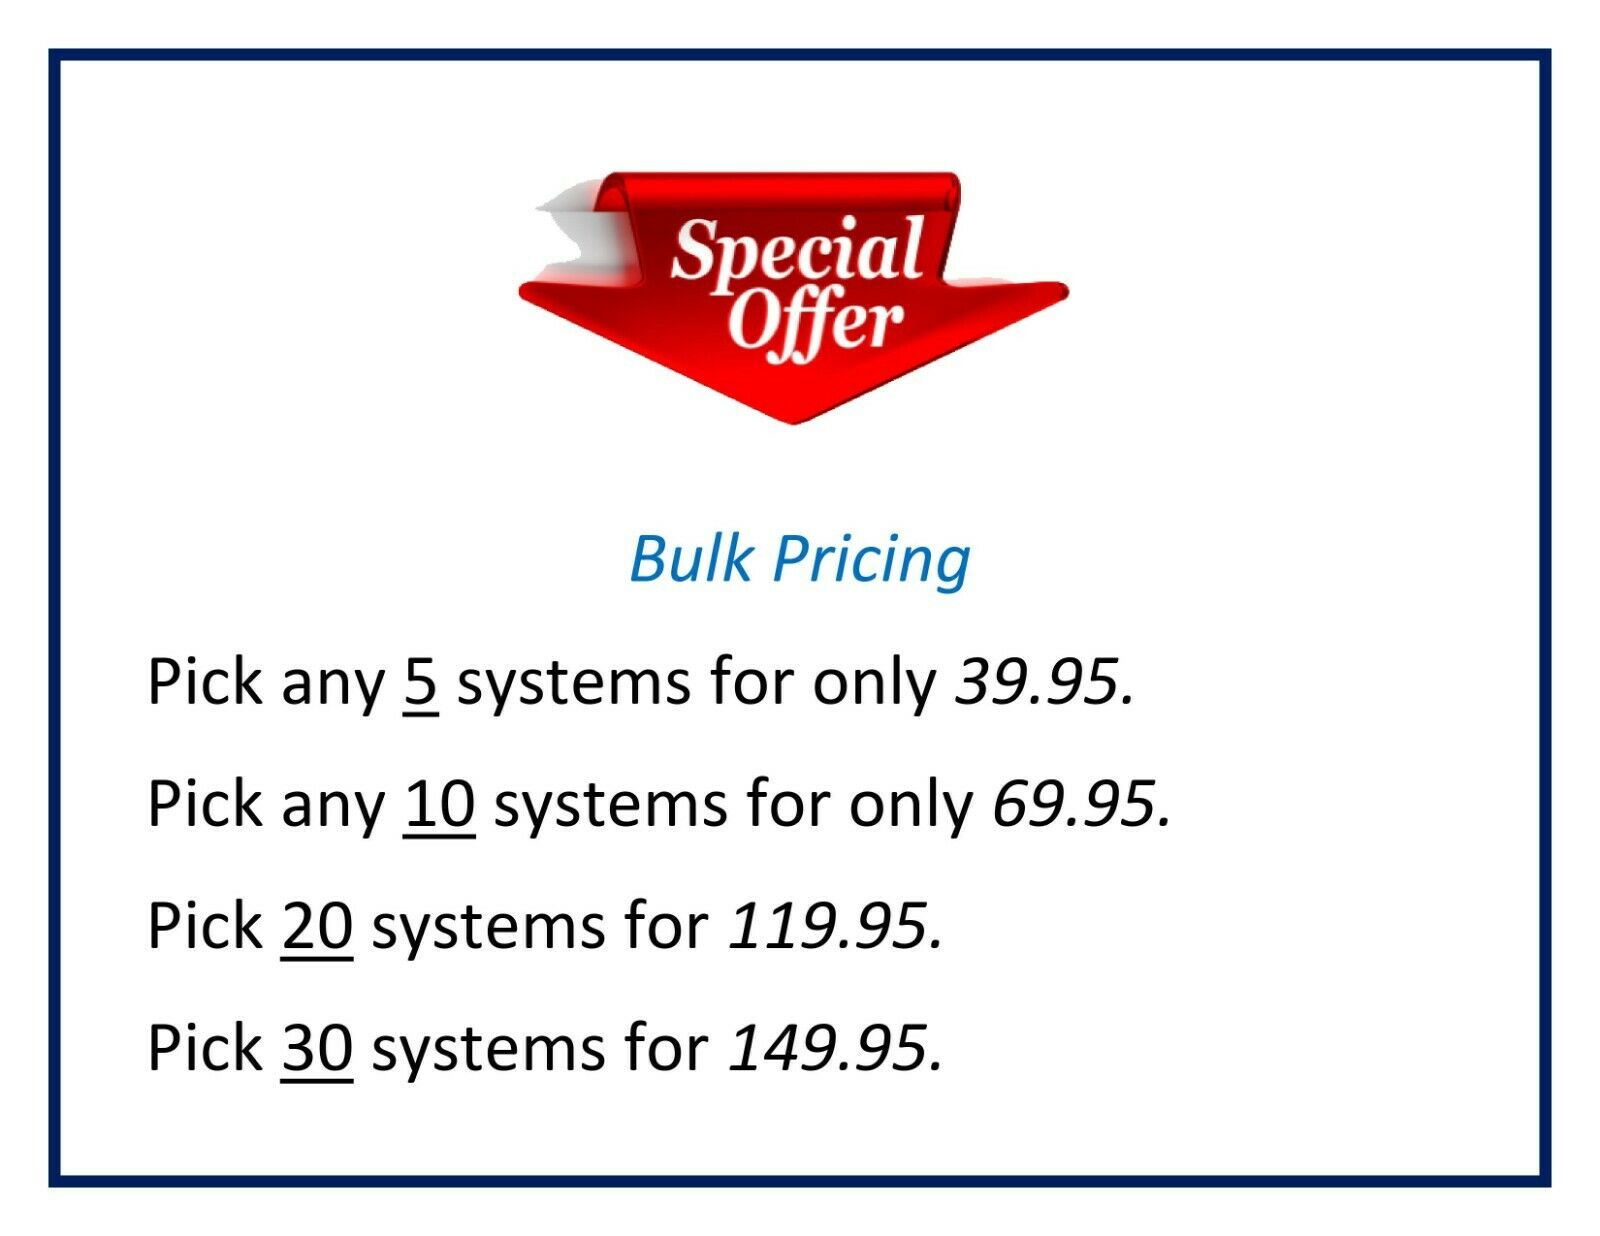 Forex Bulk Pricing To Save Even More, Pick Any 5 Systems!